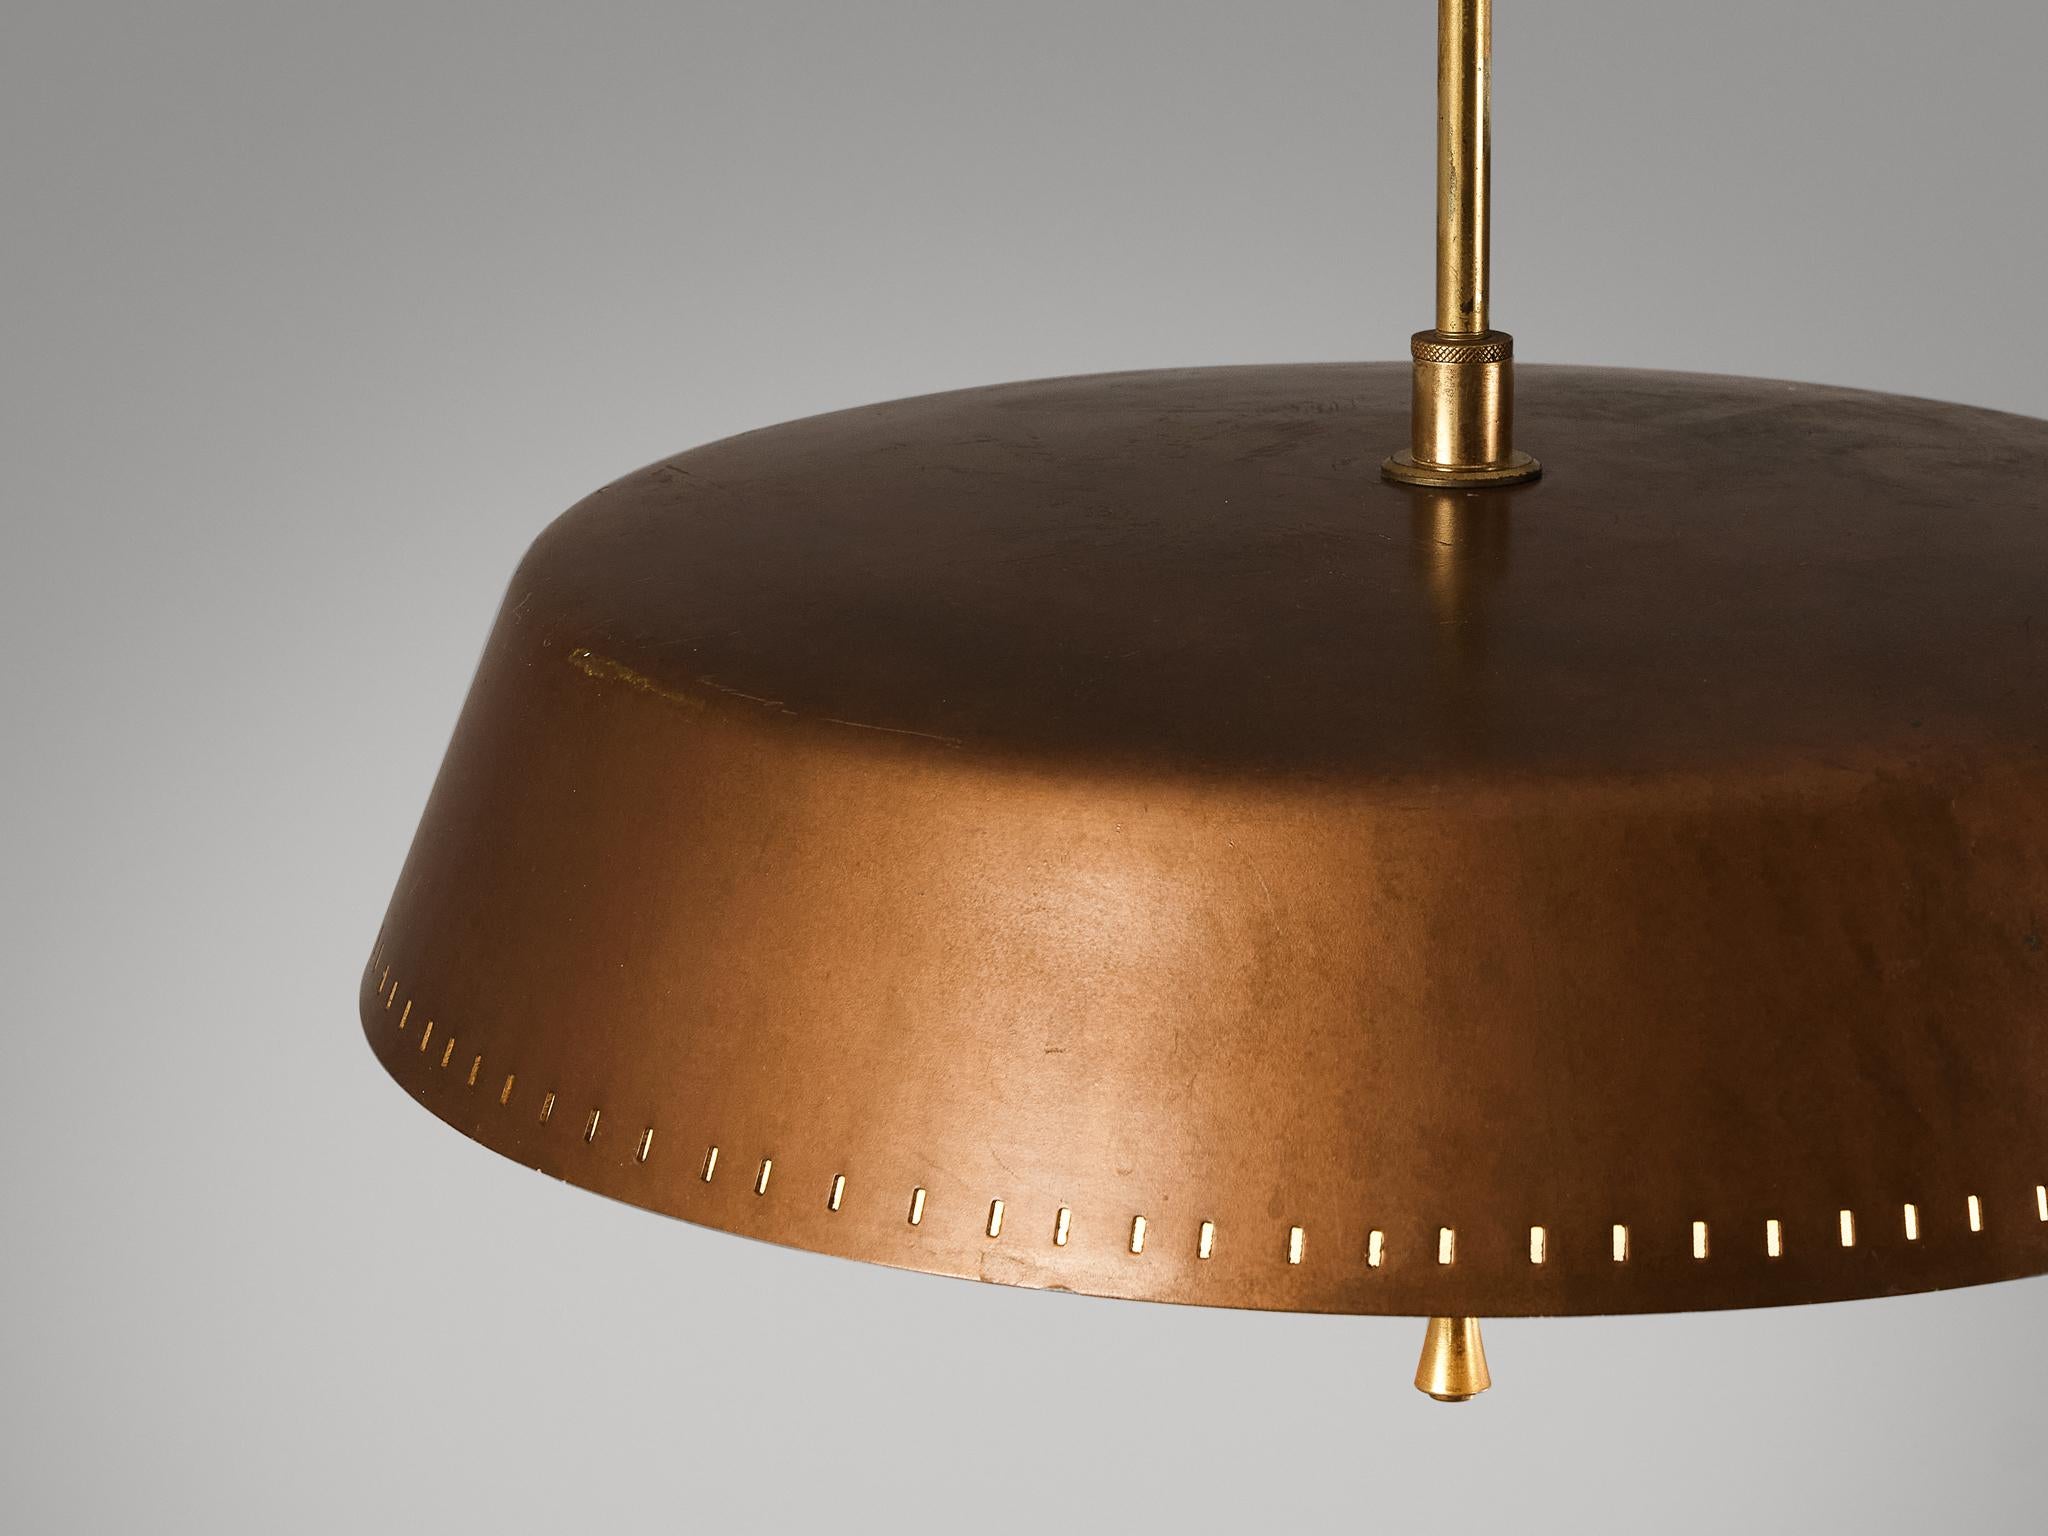 Mid-Century Modern Italian Ceiling Light with Counterweight in Copper and Satin Glass